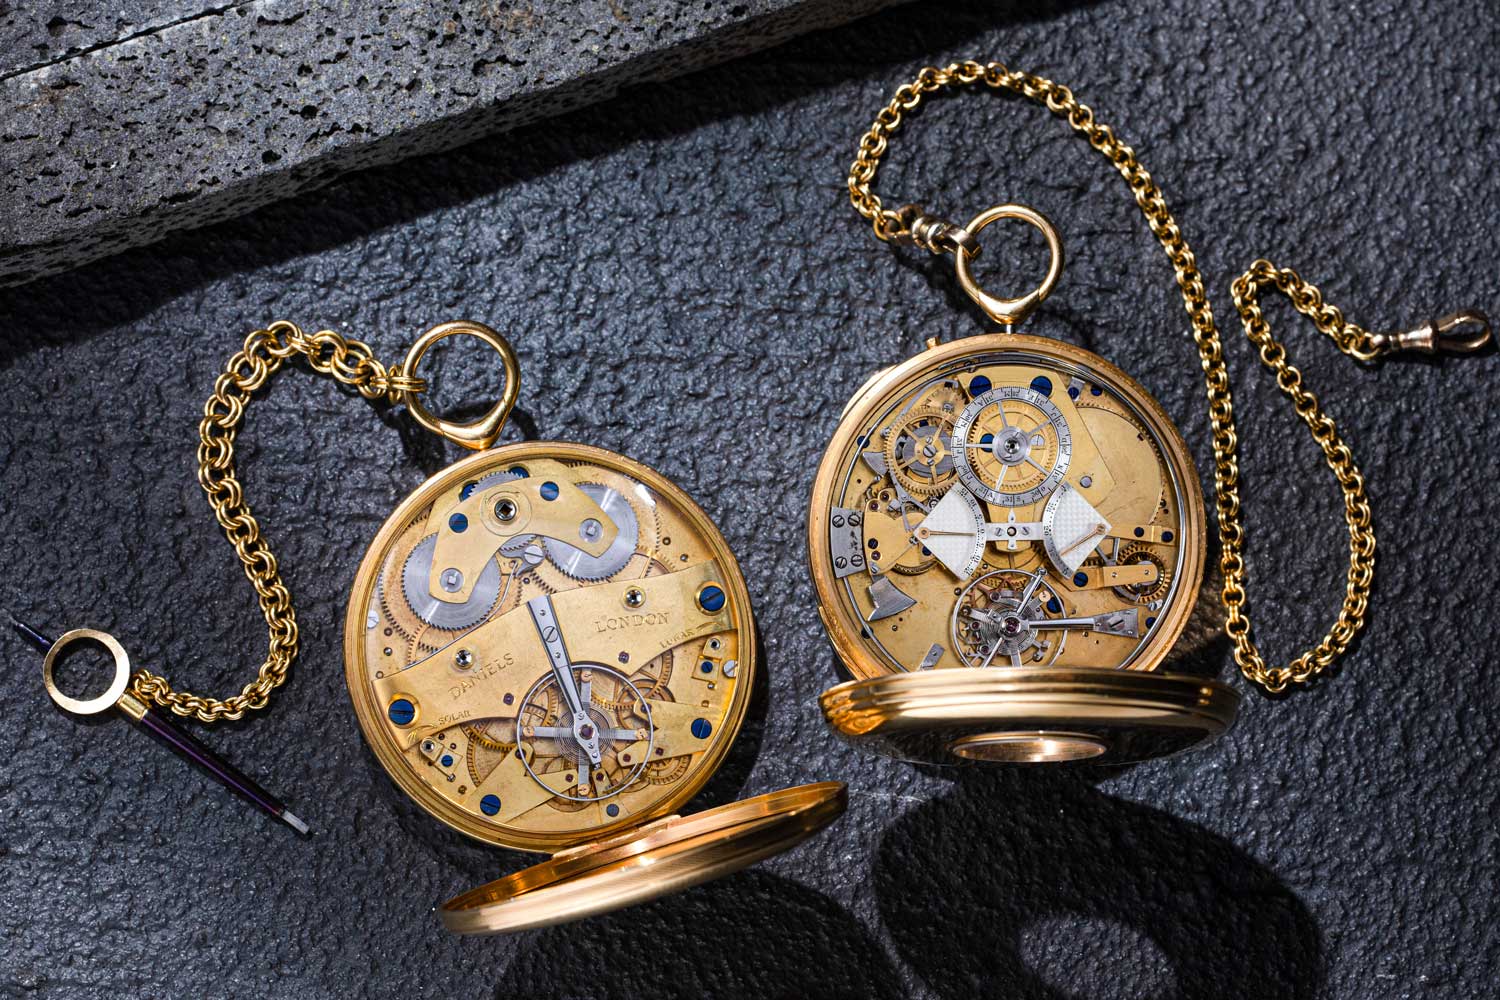 Casebacks of the George Daniels Space Traveller (1982) and Grand Complication (1987) (Image: The Hour Glass)